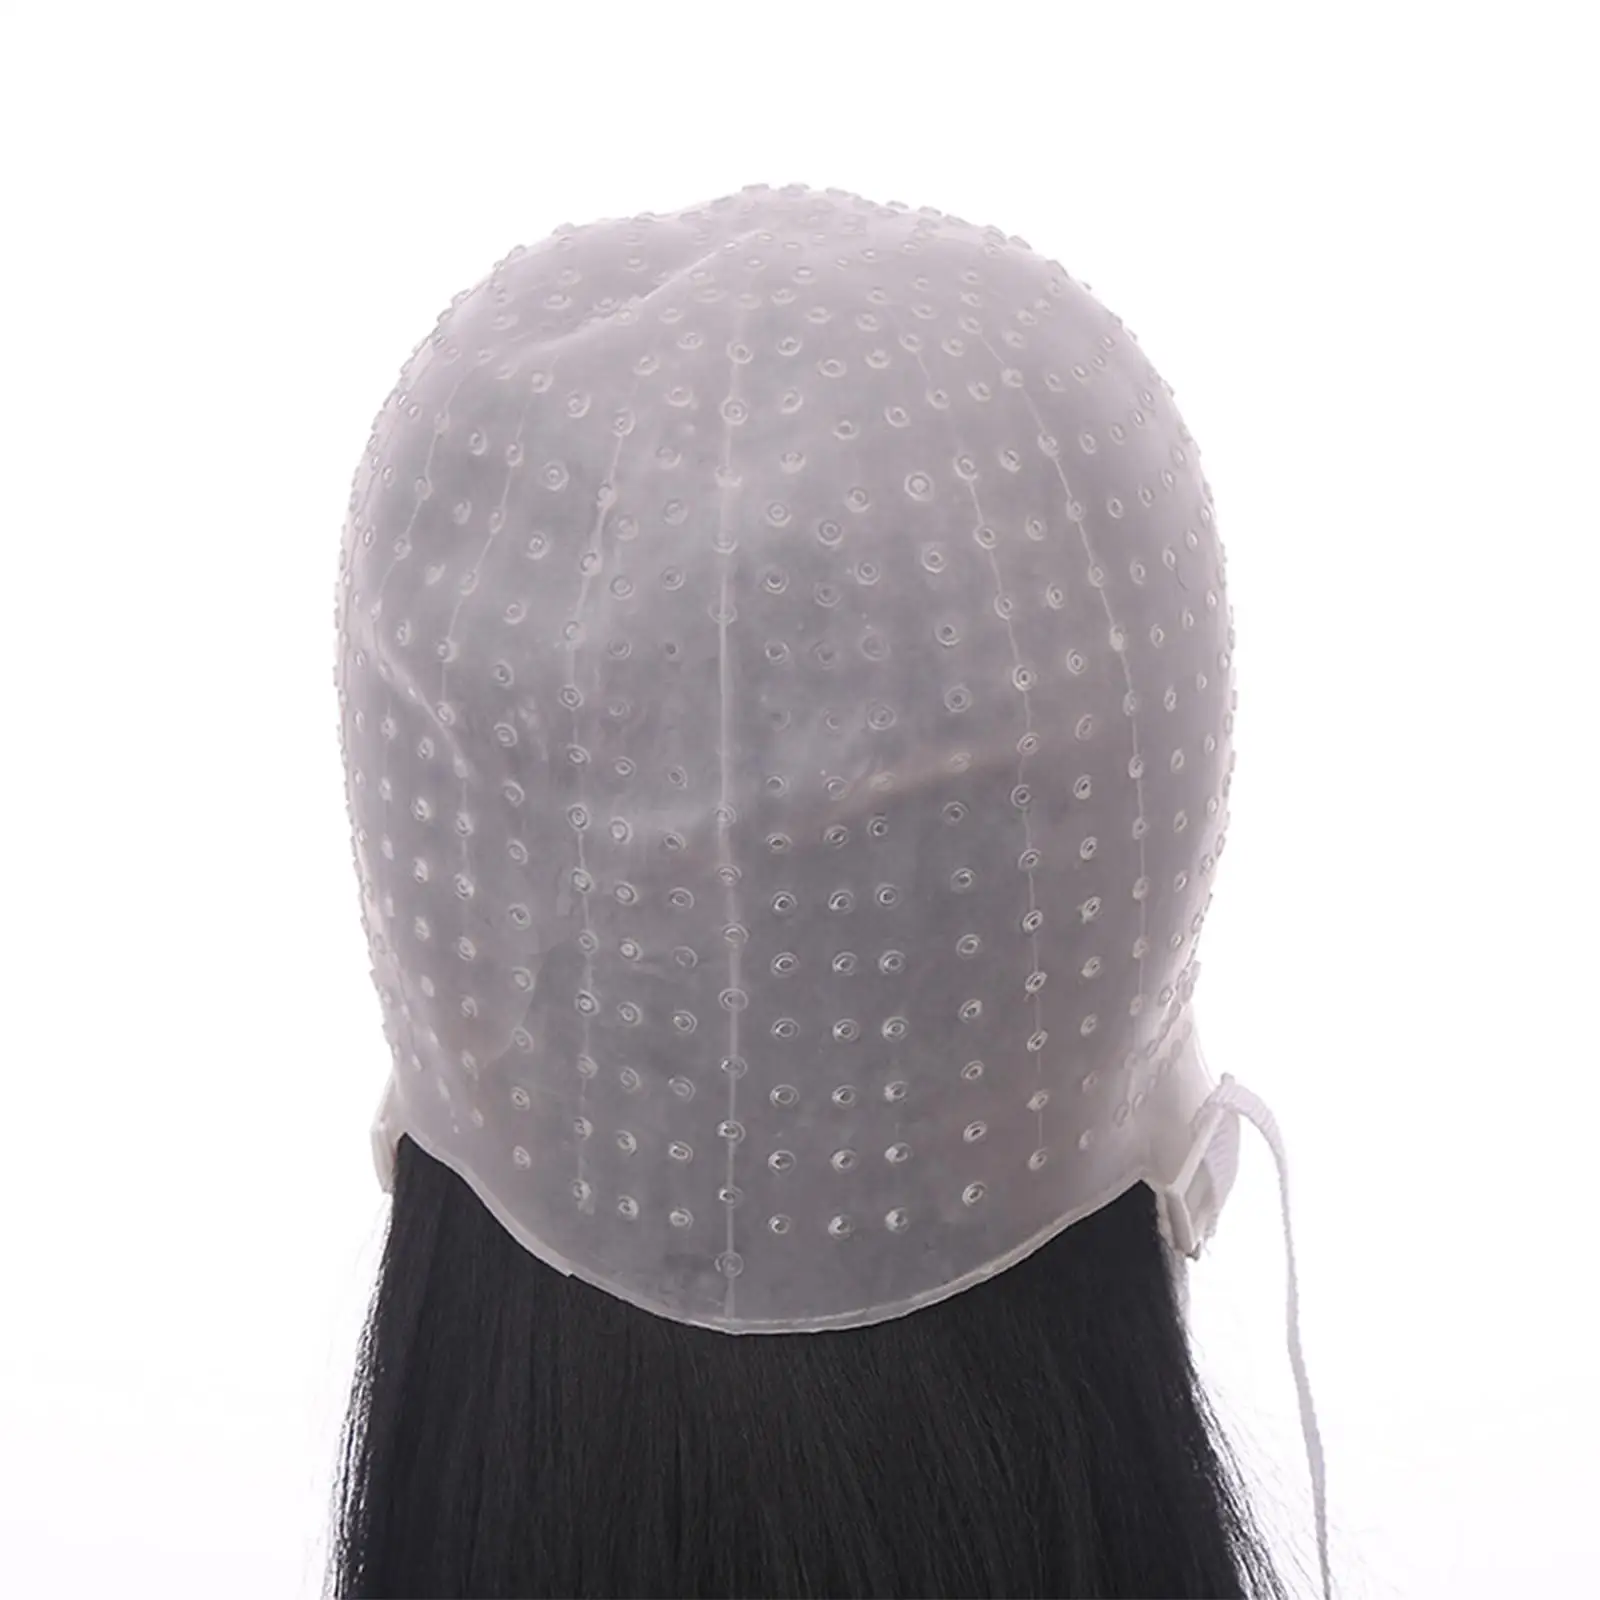 Silicone Hair Highlighting Hat, with Binding Band Hair Dye Hat for Barber Salon  Home and Salon Use ,Hair Coloring ,